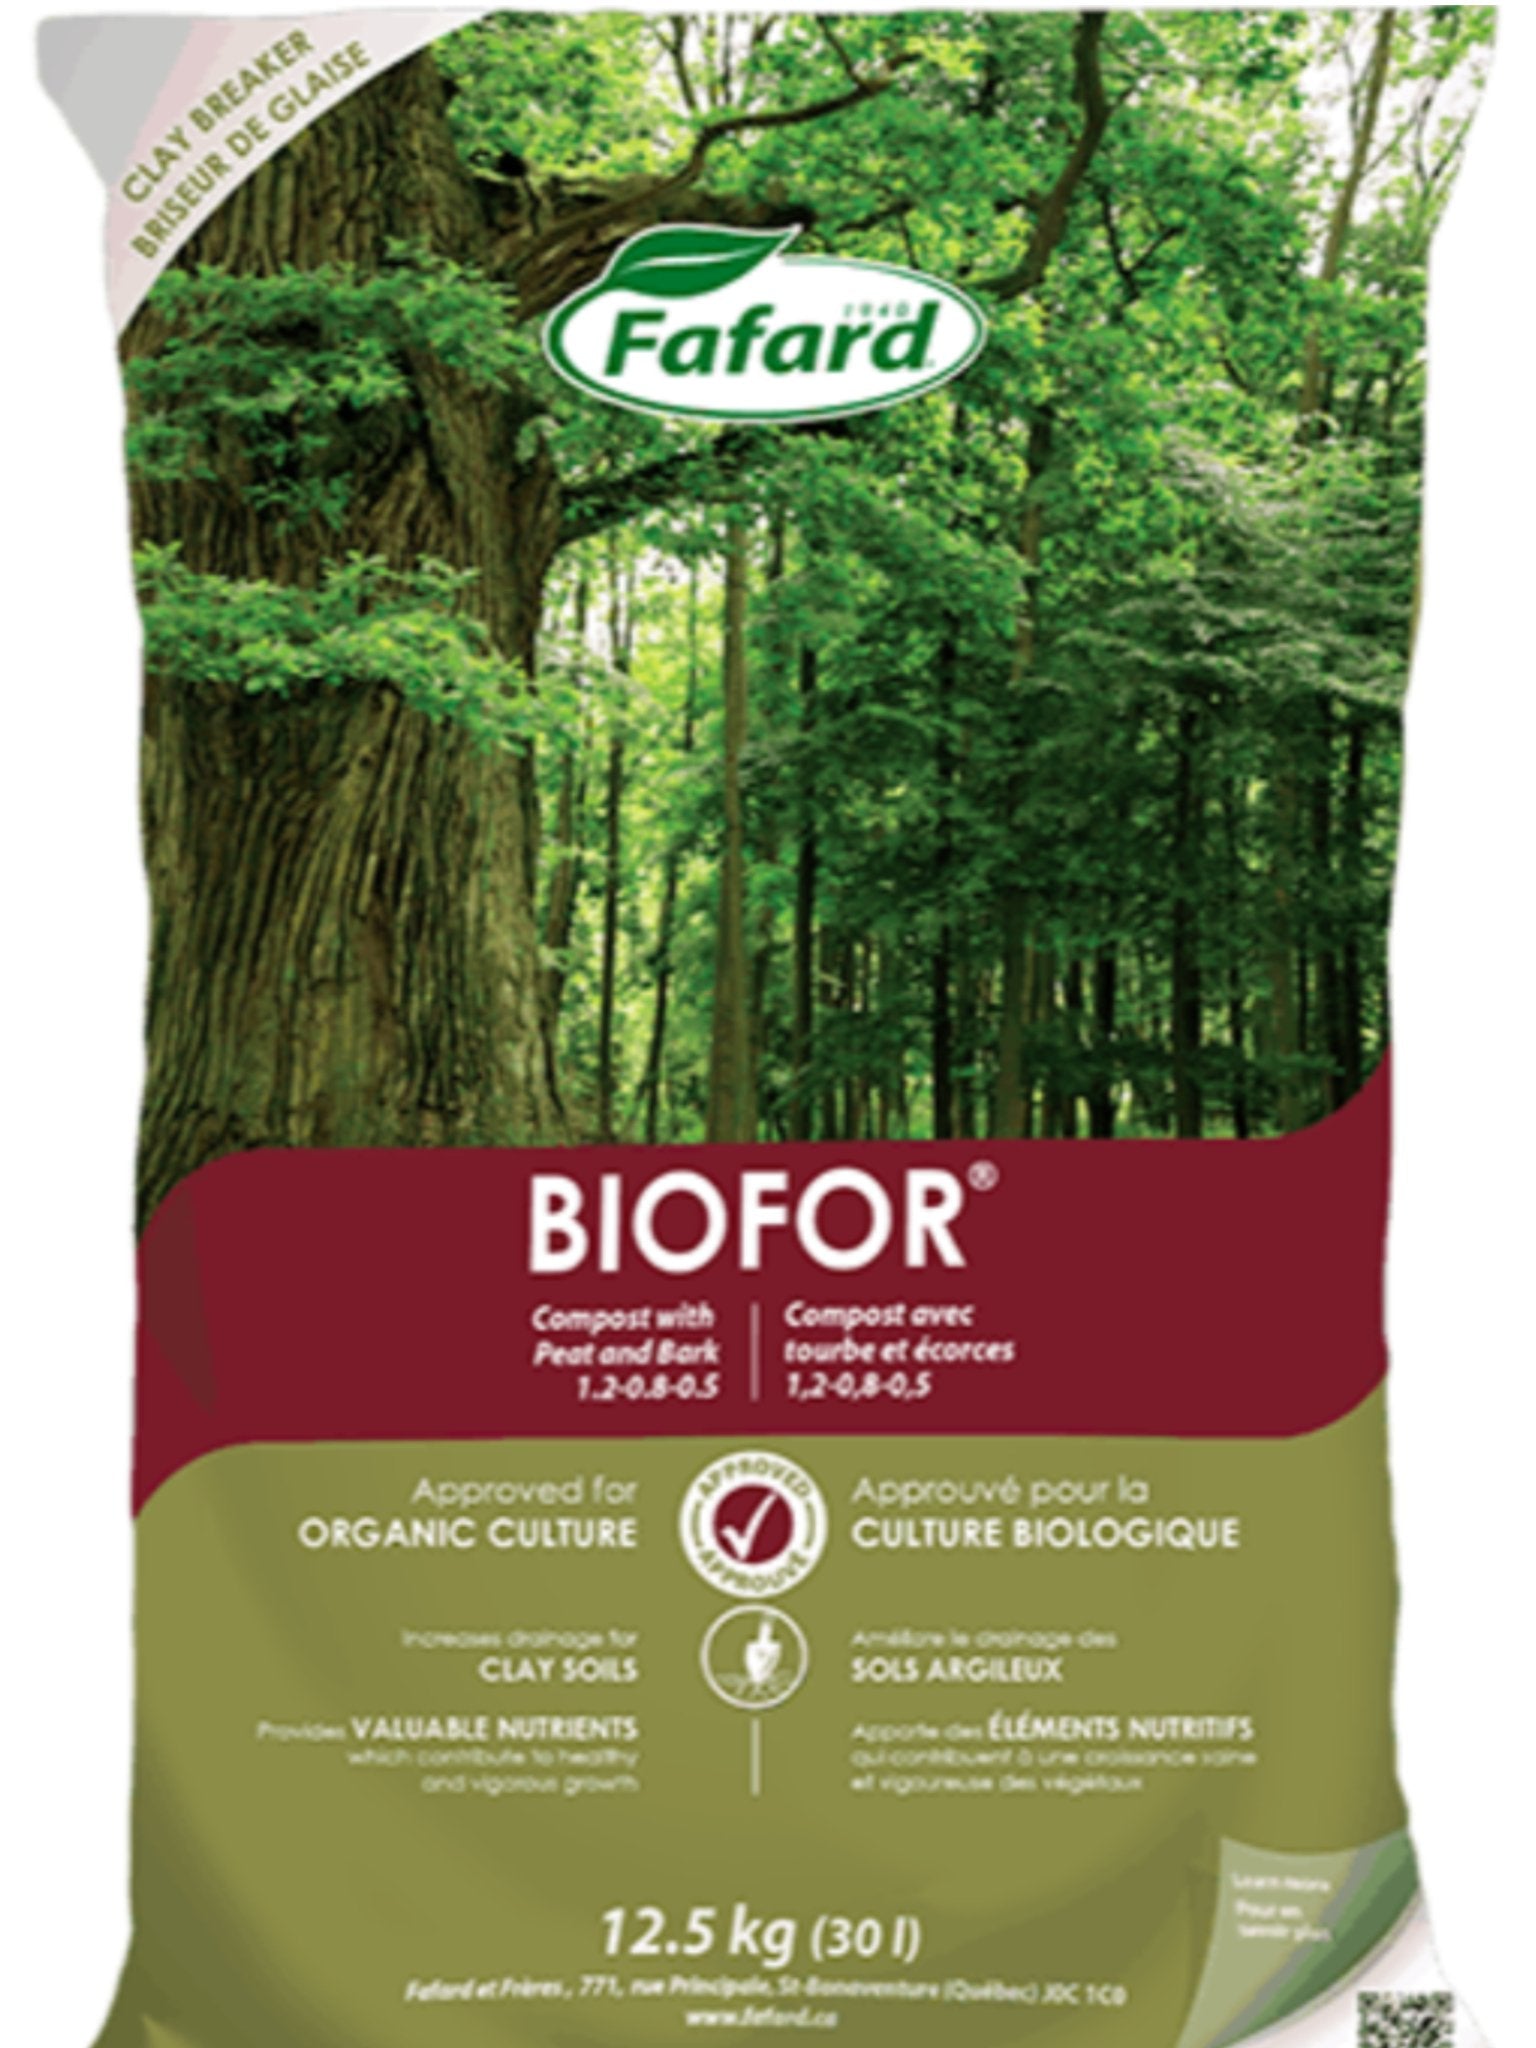 Fafard BIOFOR® Compost with Peat and Bark